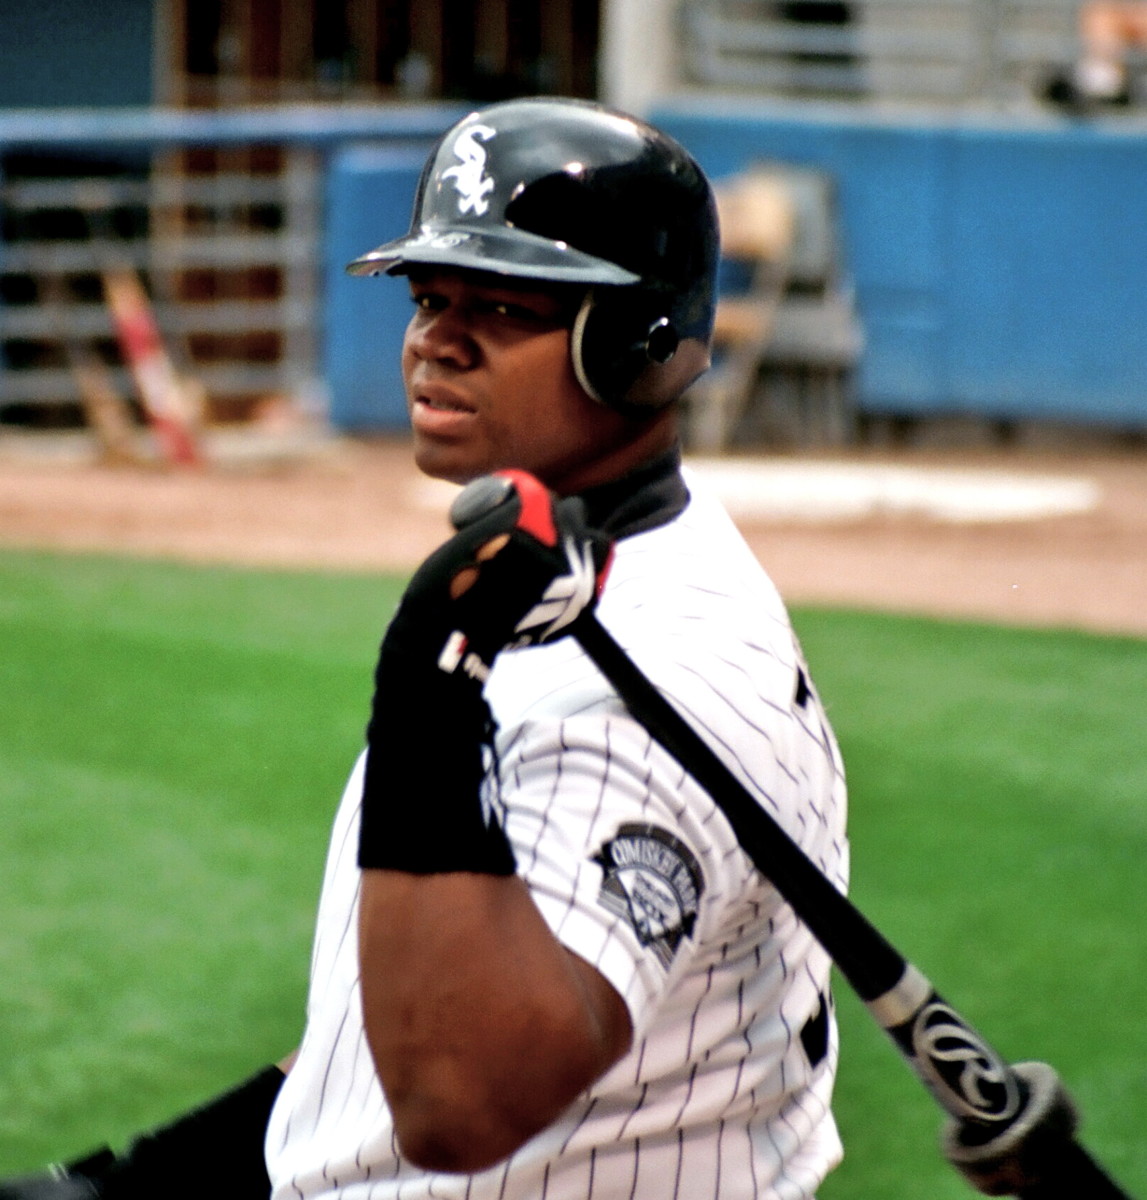 Frank Thomas was a powerful force for many seasons with the Chicago White Sox.